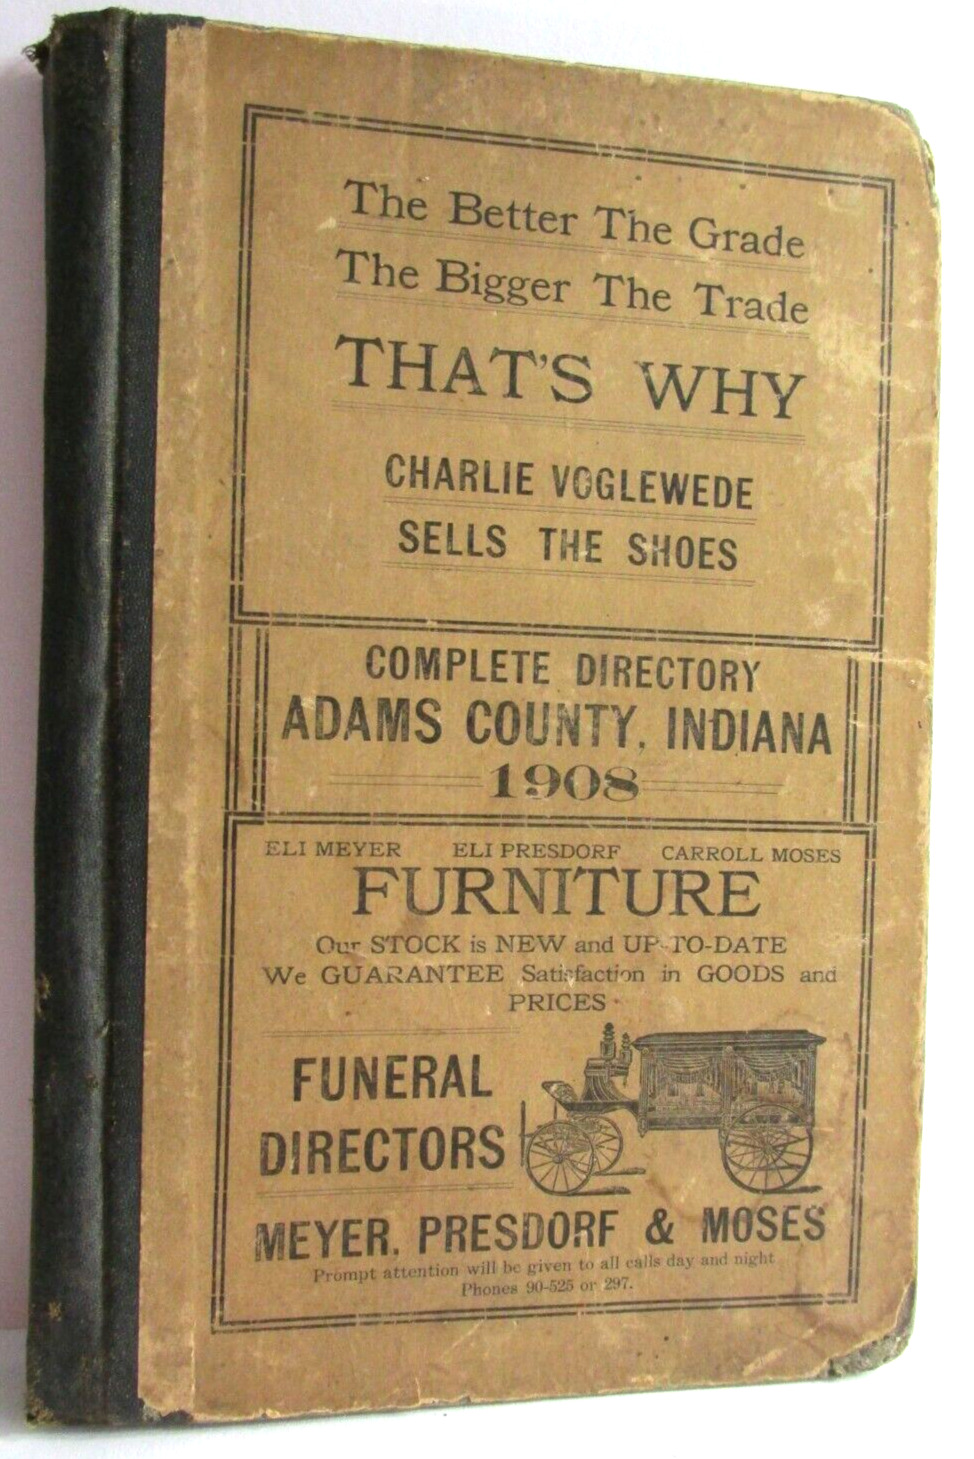 1908 ADAMS COUNTY INDIANA COMPLETE DIRECTORY, With Small Map, Decatur In. Adv.